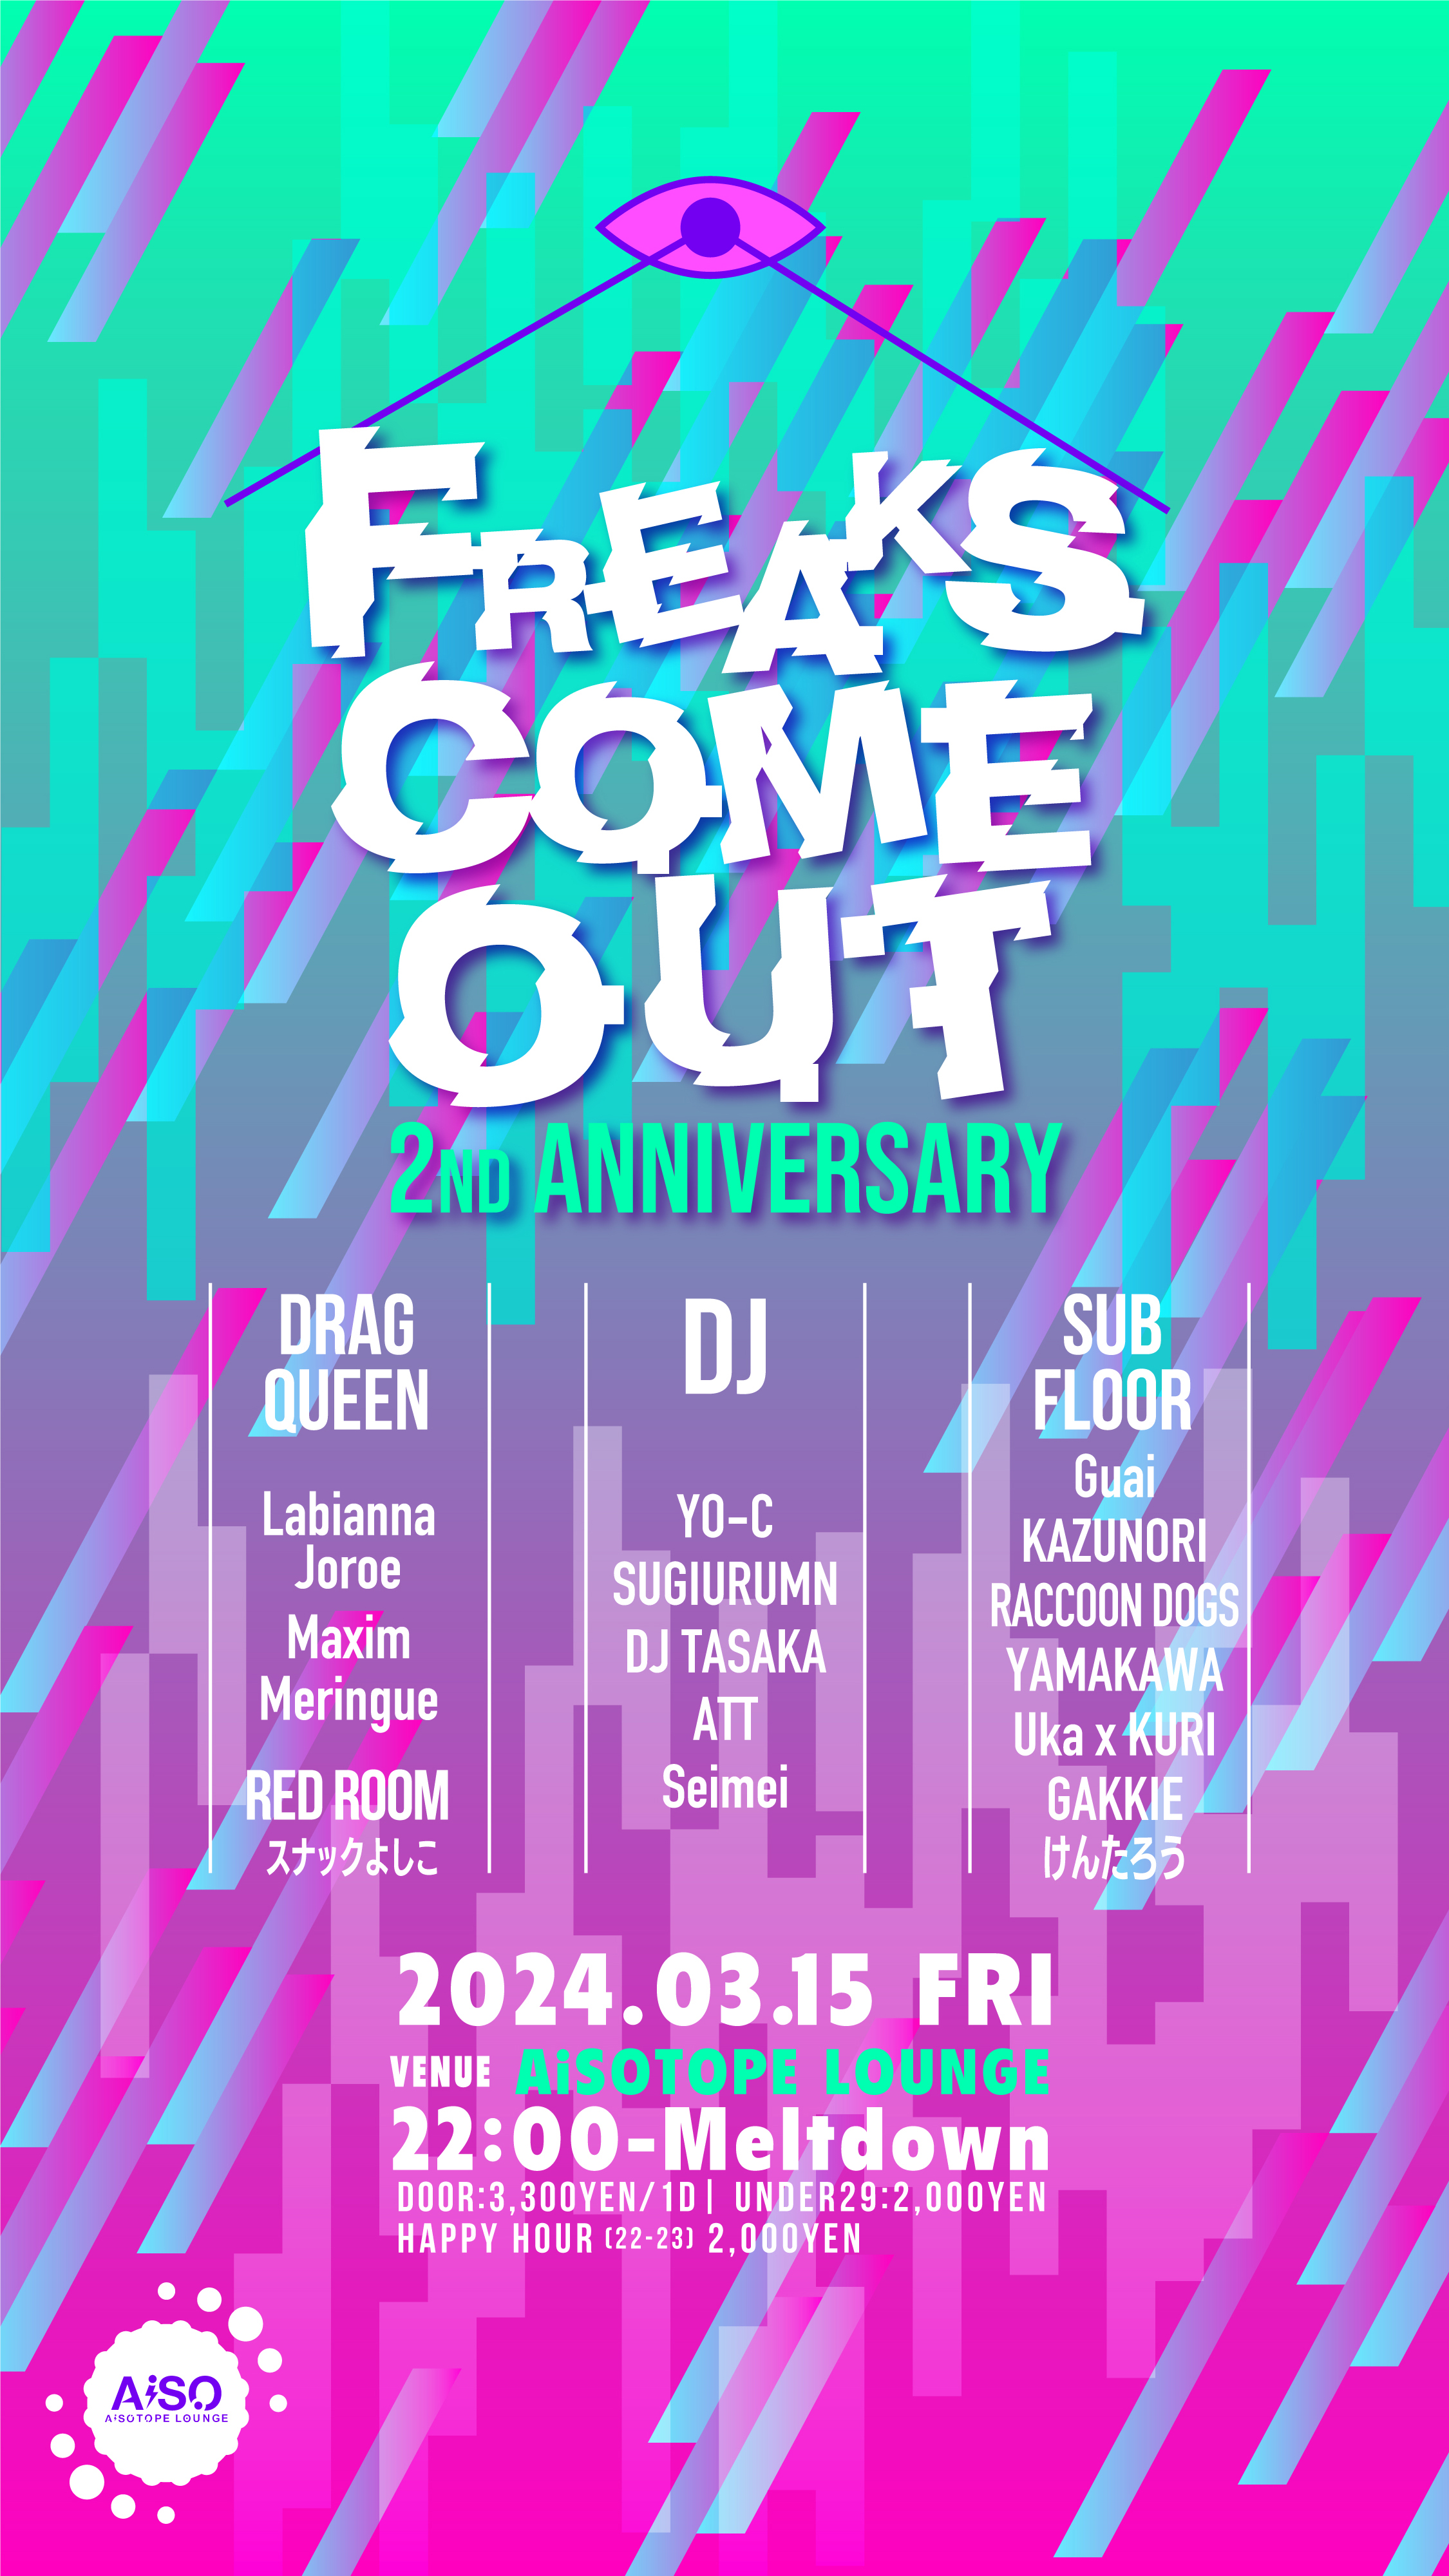 FREAKS COME OUT -2nd ANNIVERSARY-